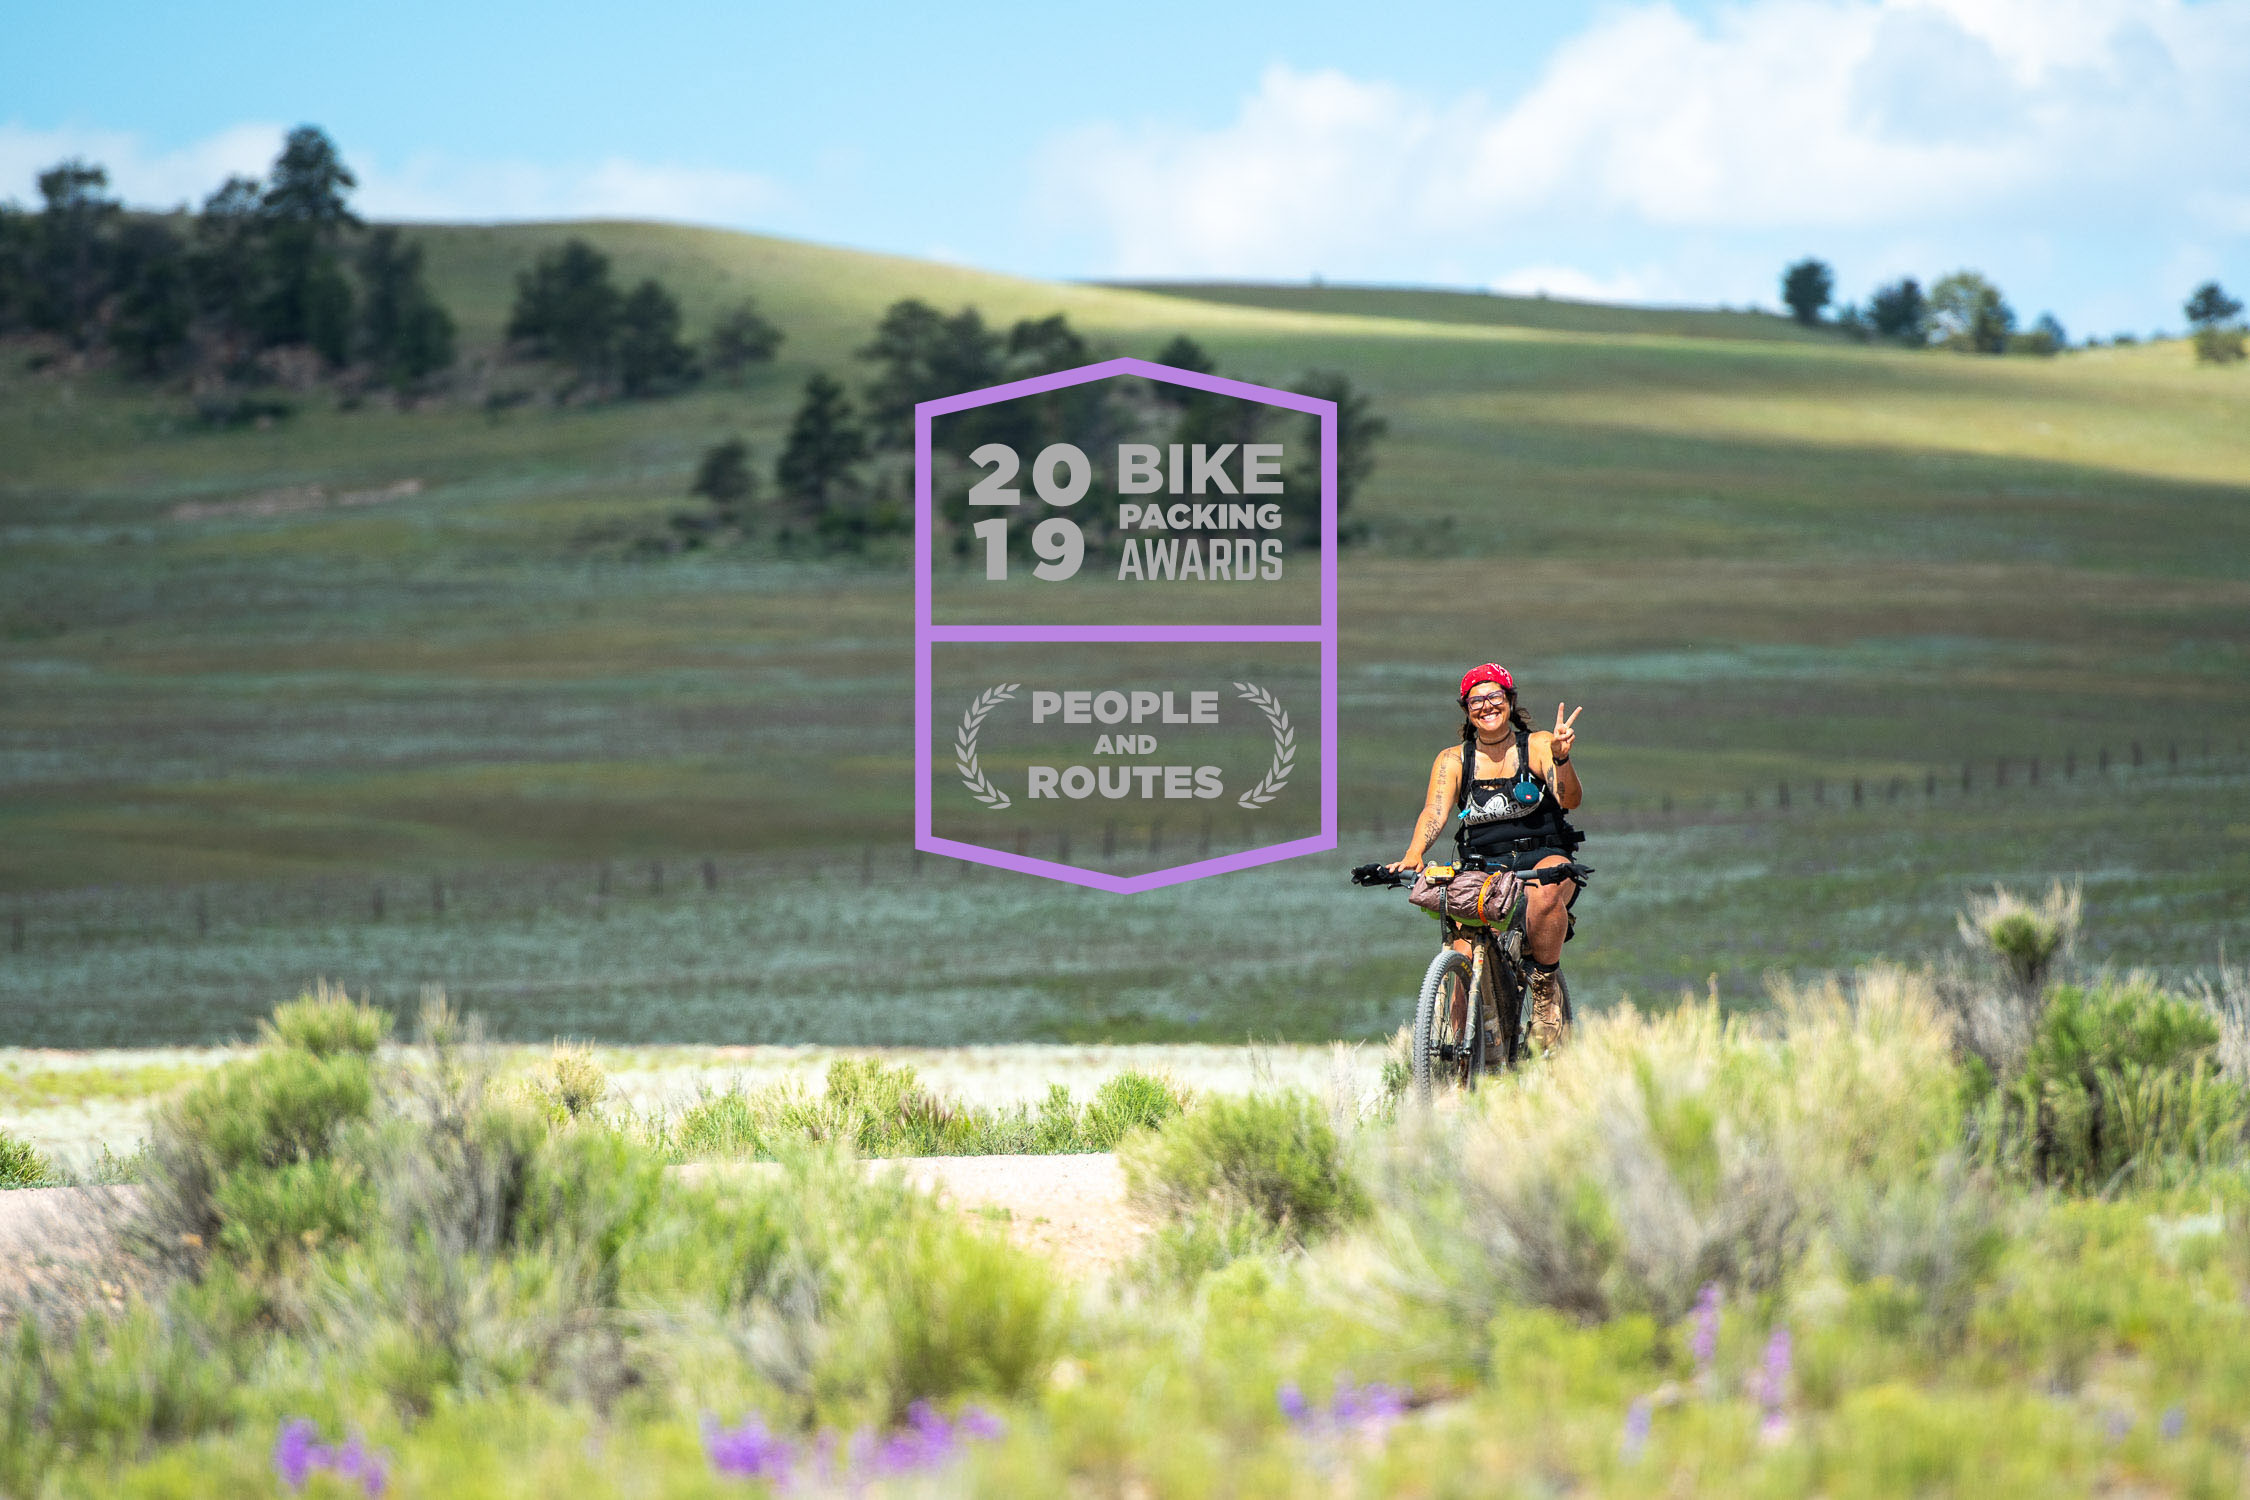 2019 Bikepacking Awards, people and routes